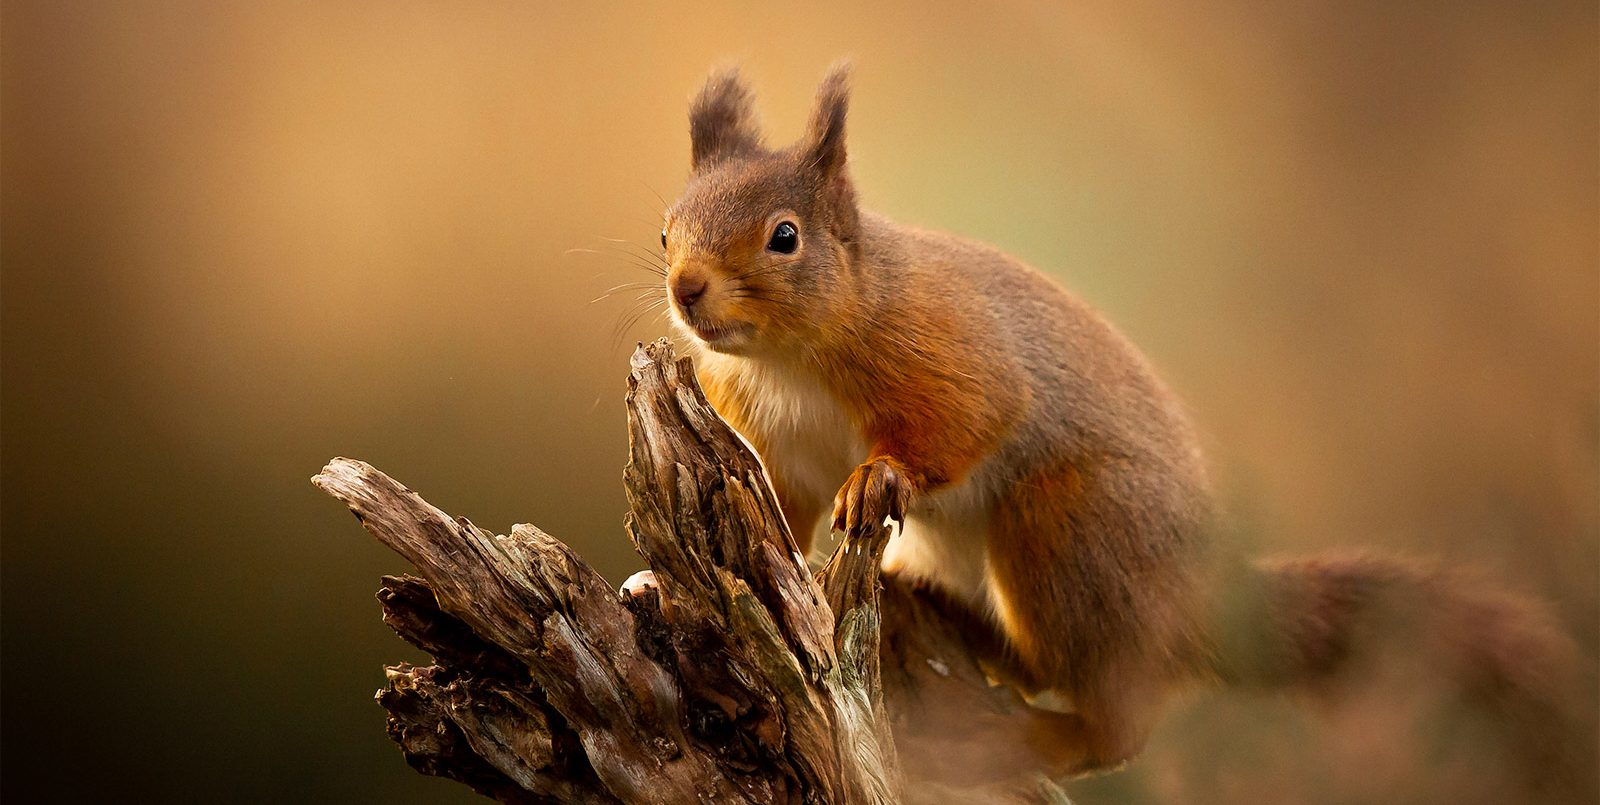 Red squirrel photograph